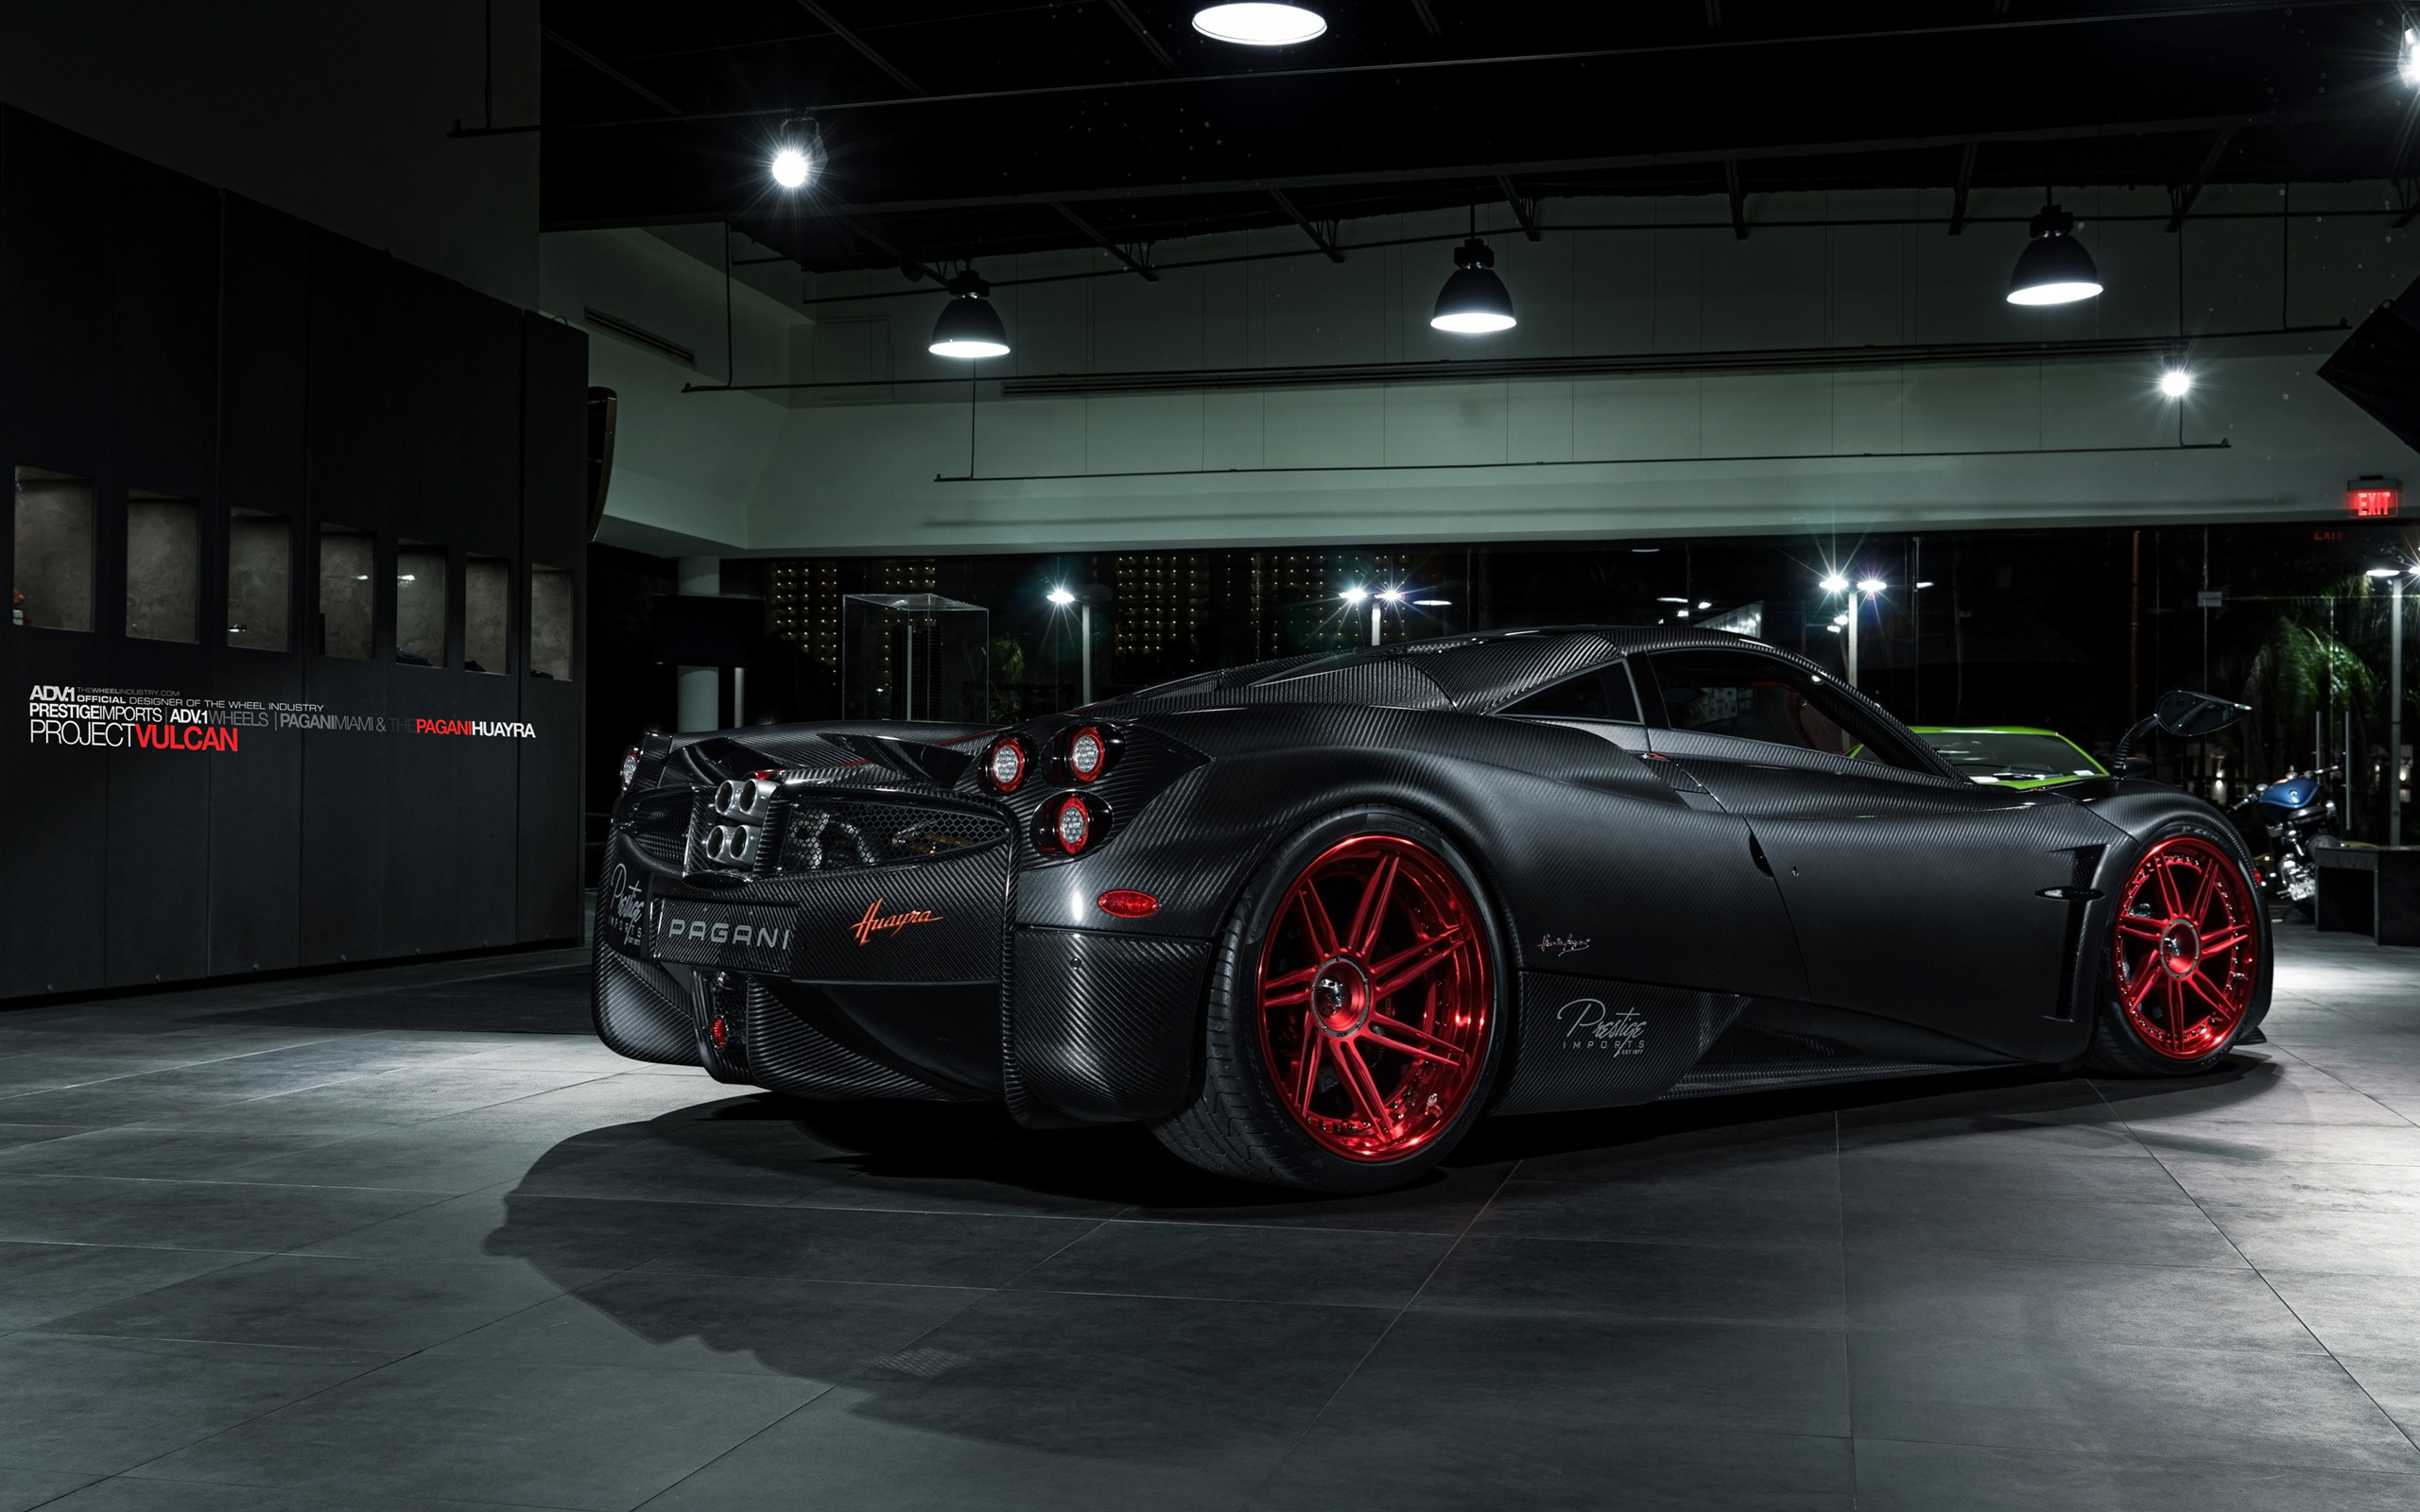 2560x1600 Images In High Quality: Pagani Huayra by Hal Ankrom, 02/06/2016